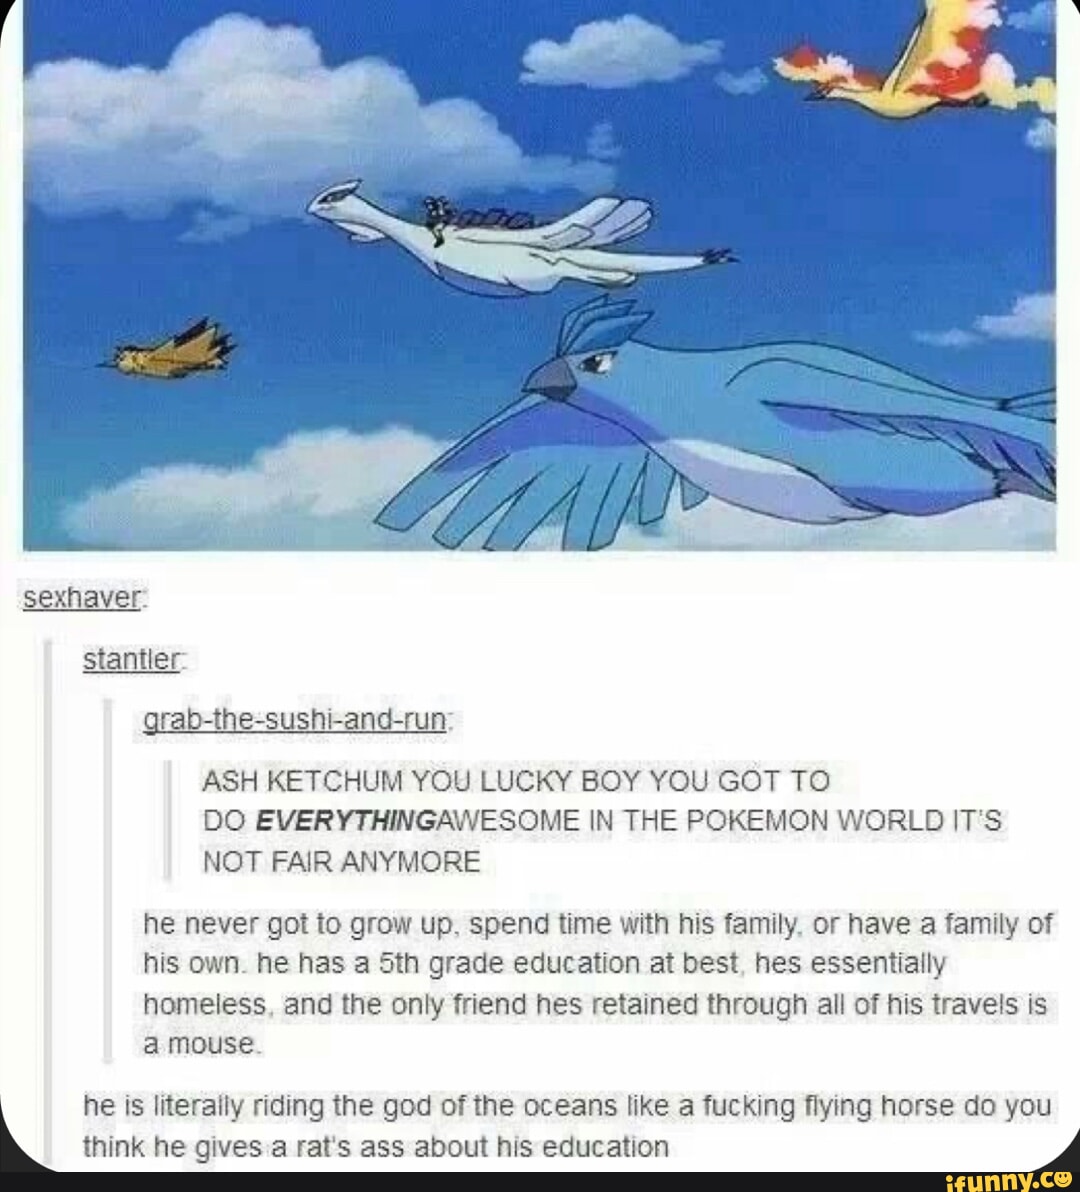 Articuno memes. Best Collection of funny Articuno pictures on iFunny Brazil